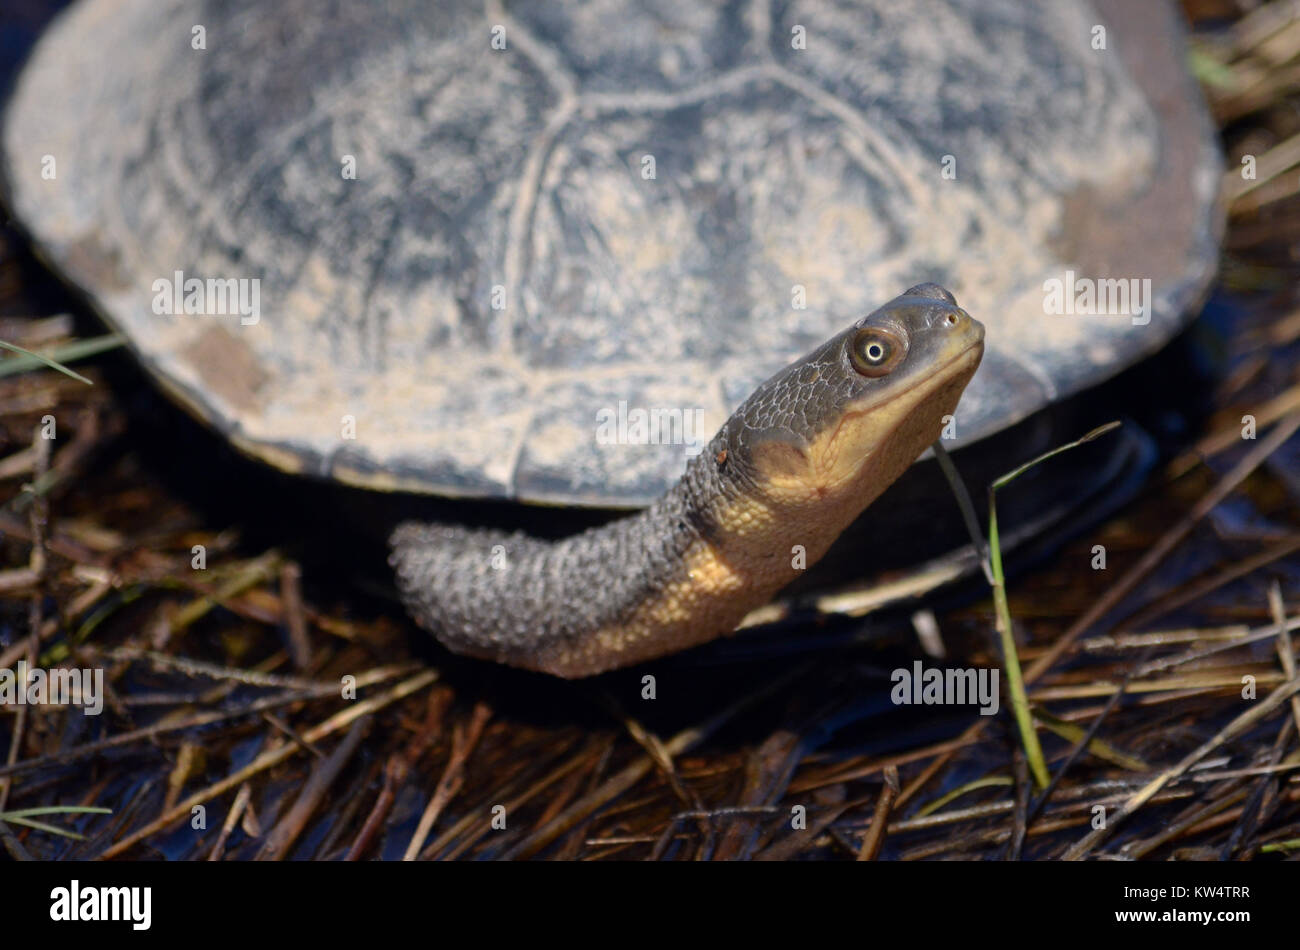 Eastern long-necked turtle, Chelodina longicollis on roadside from Canowindra, central west NSW, Australia. Also known as the snake-necked turtle. Stock Photo